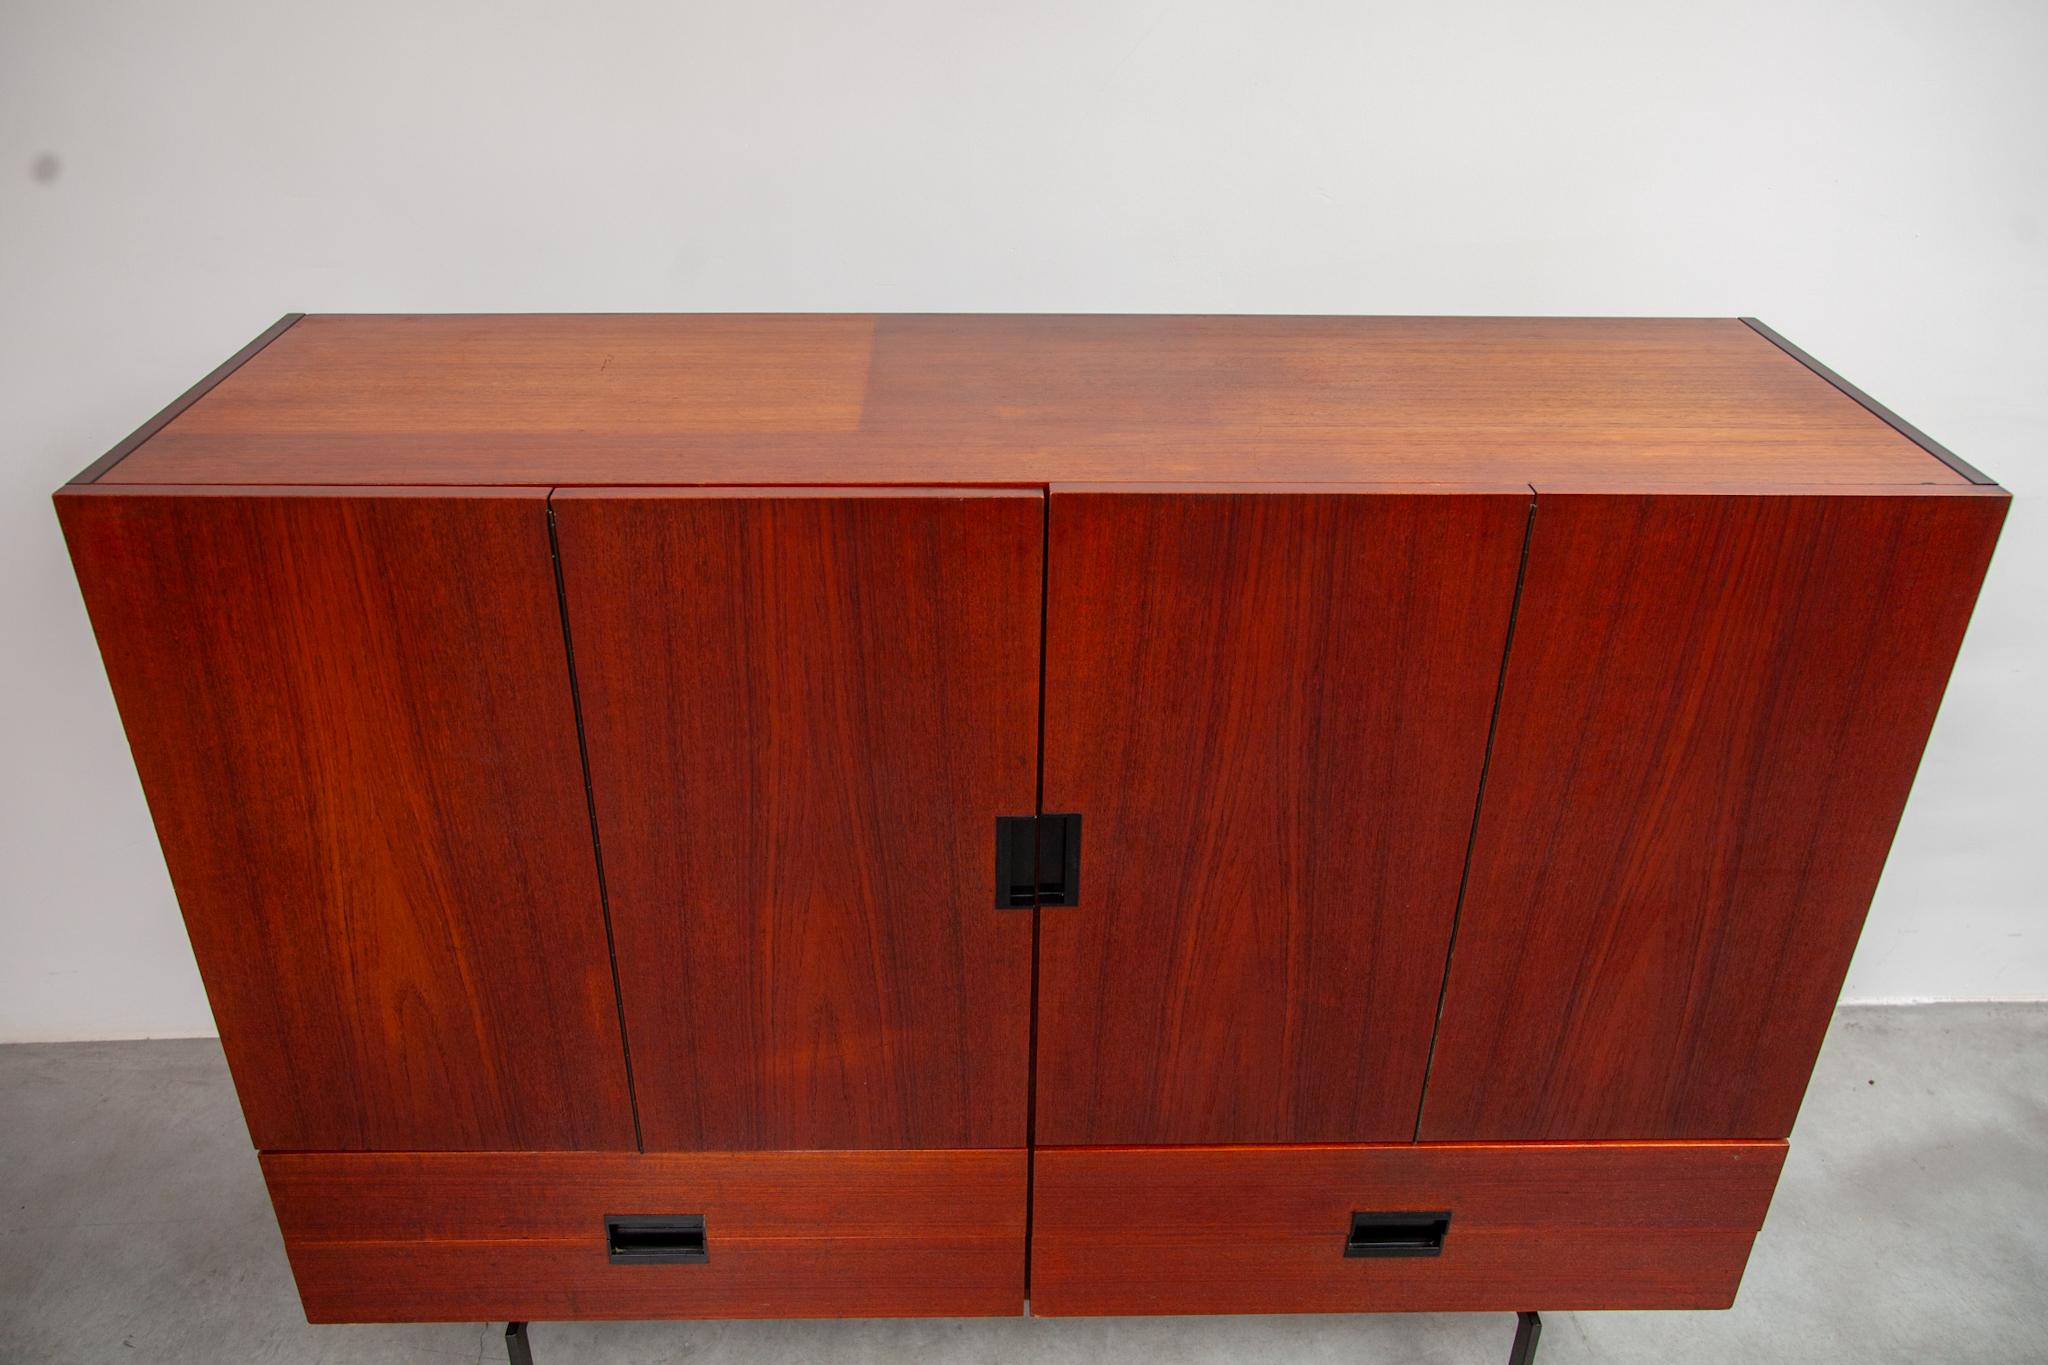 Dutch High Sideboard designed by Cees Braakman for Pastoe, Serie CU 04 For Sale